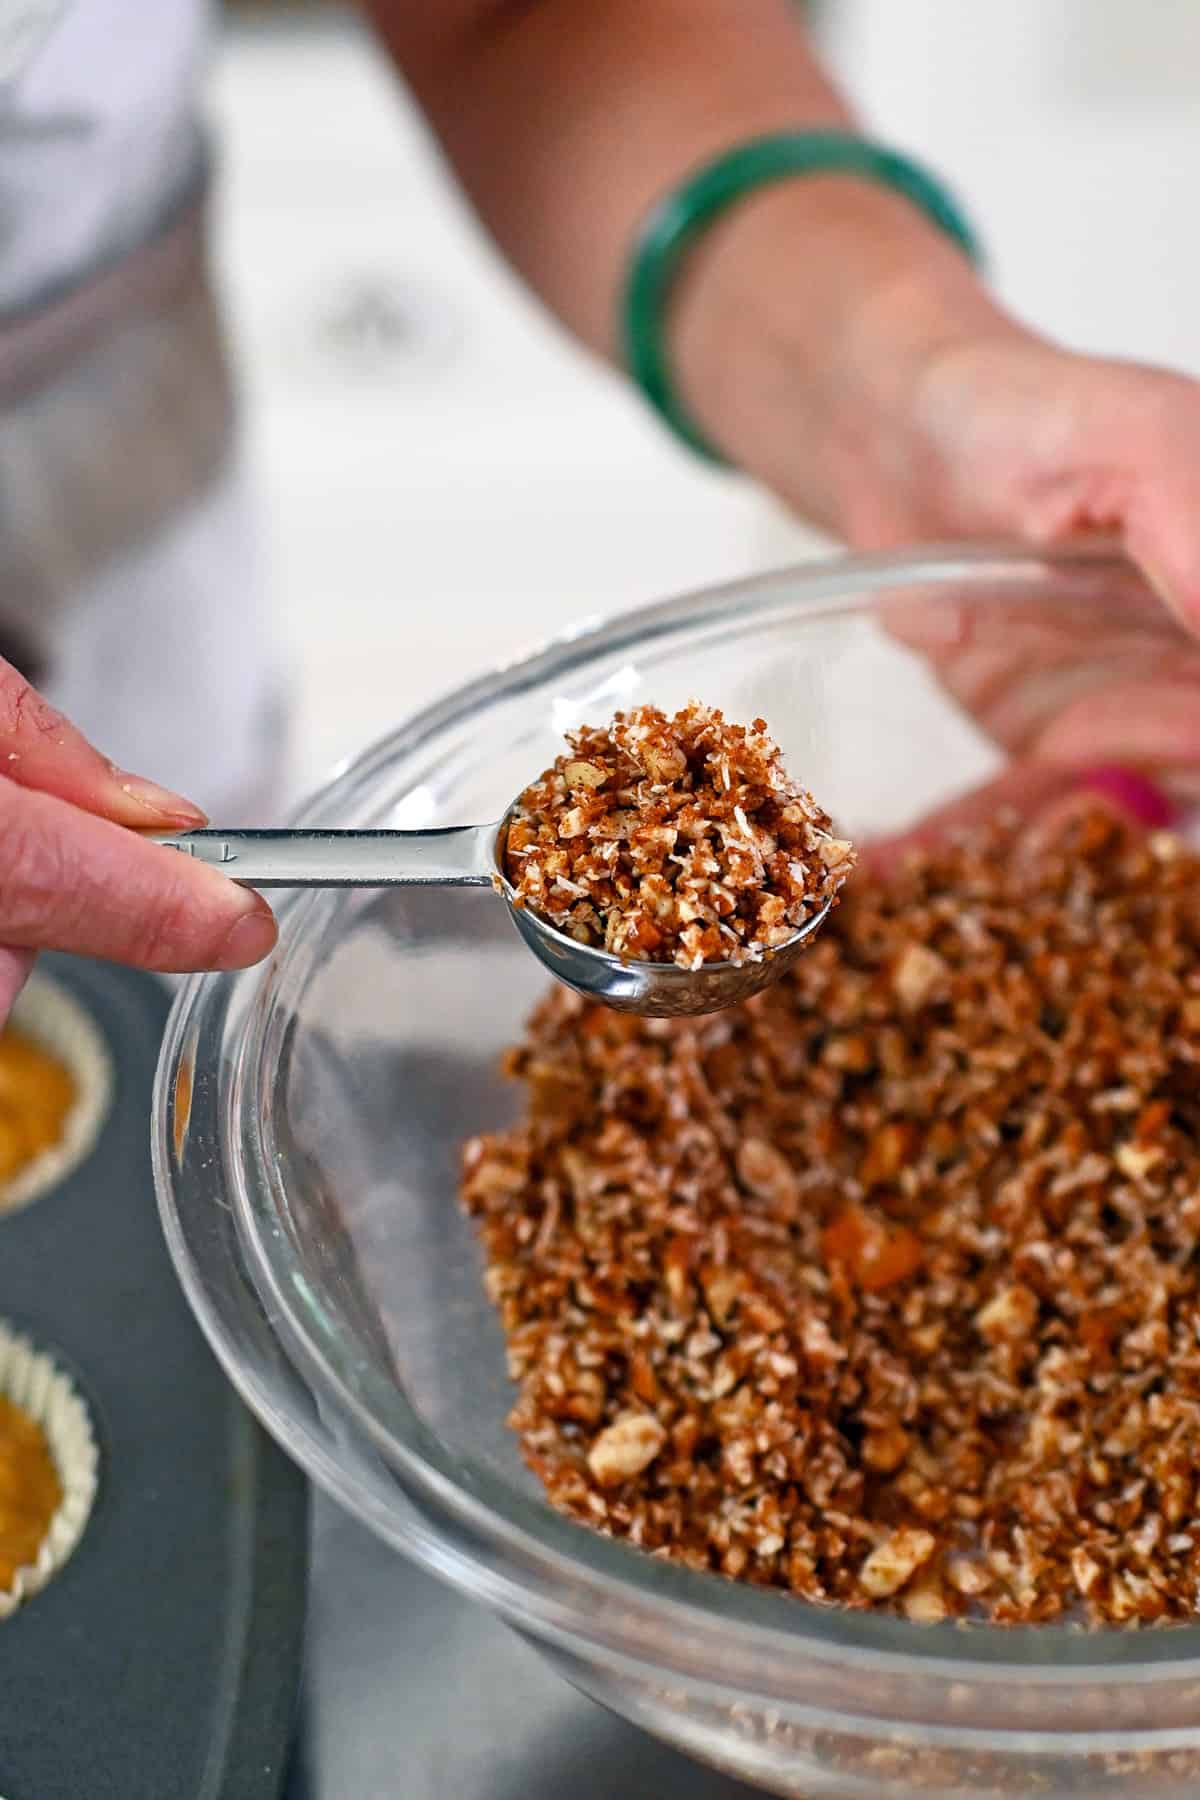 A tablespoon is used to scoop up the paleo streusel topping for the apple muffins.